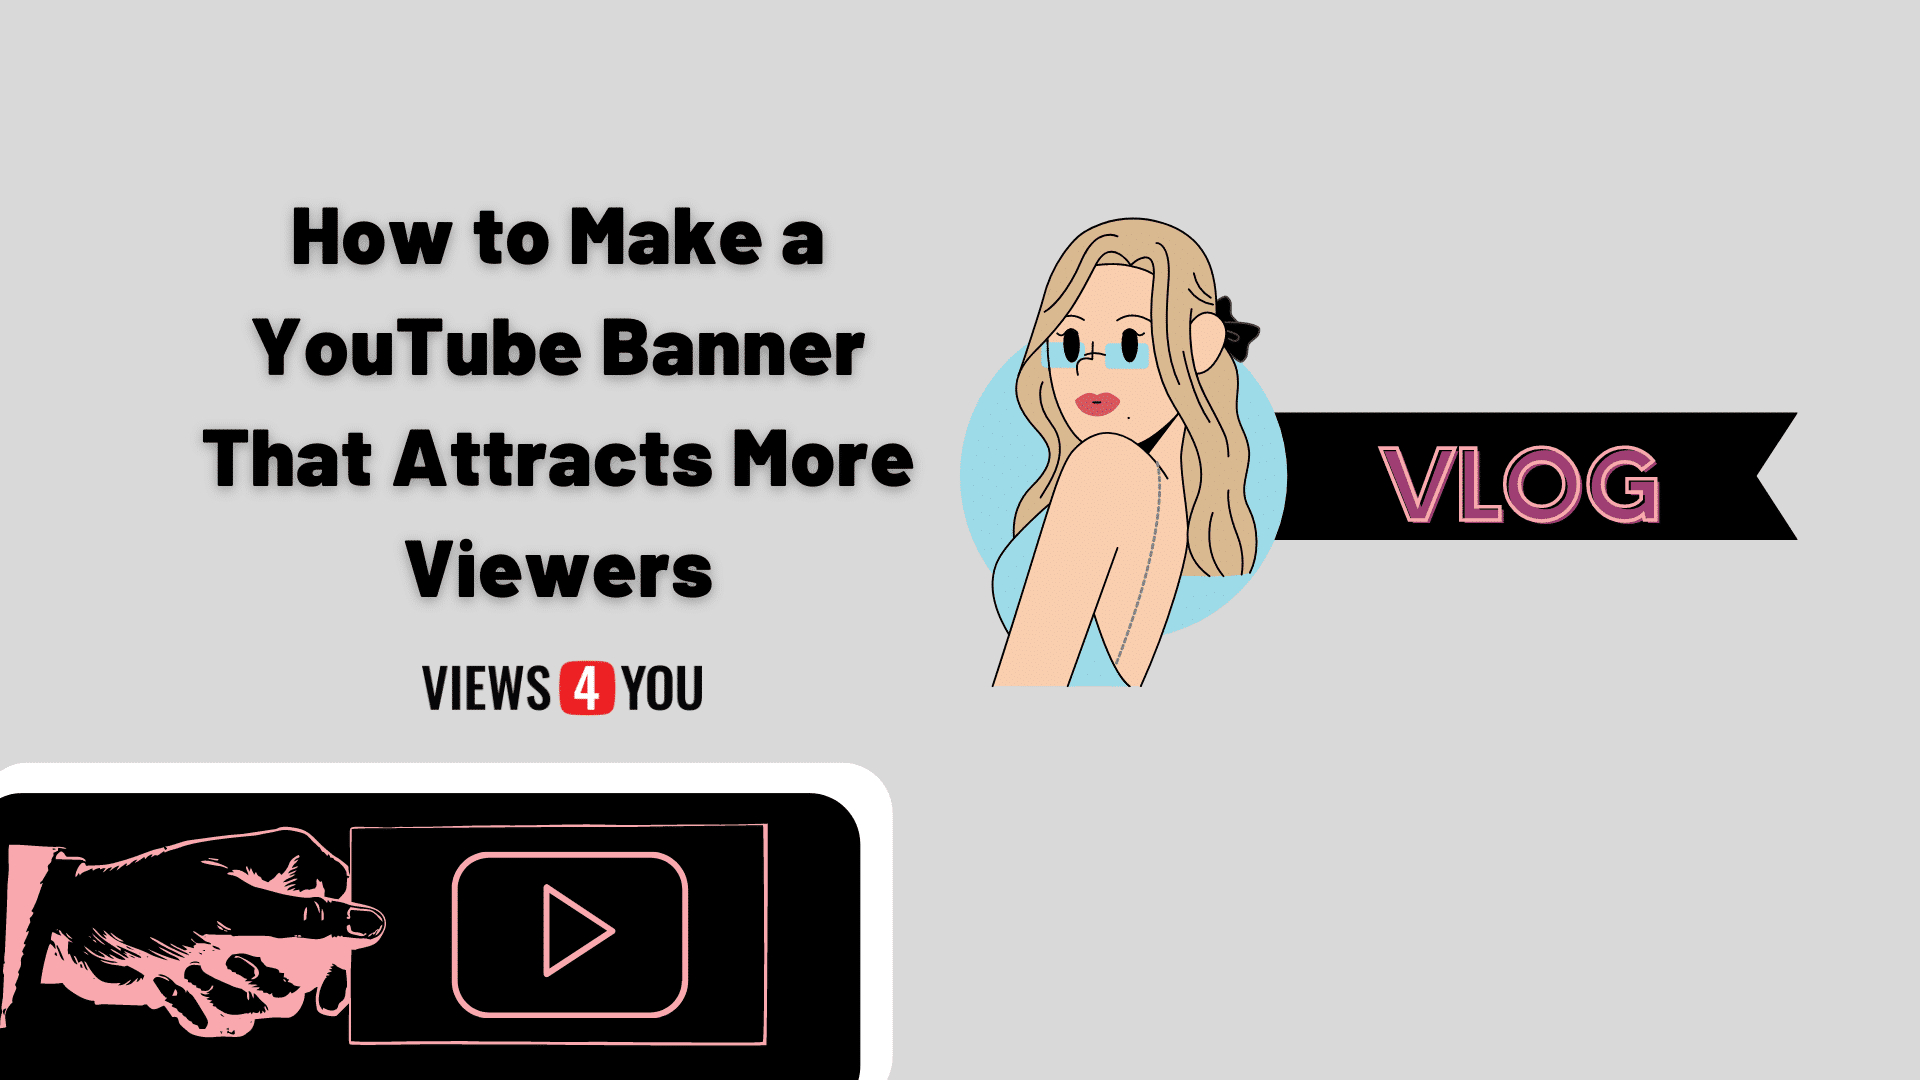 Learn how to make YouTube banner that attracts more viewers and increase engagement.